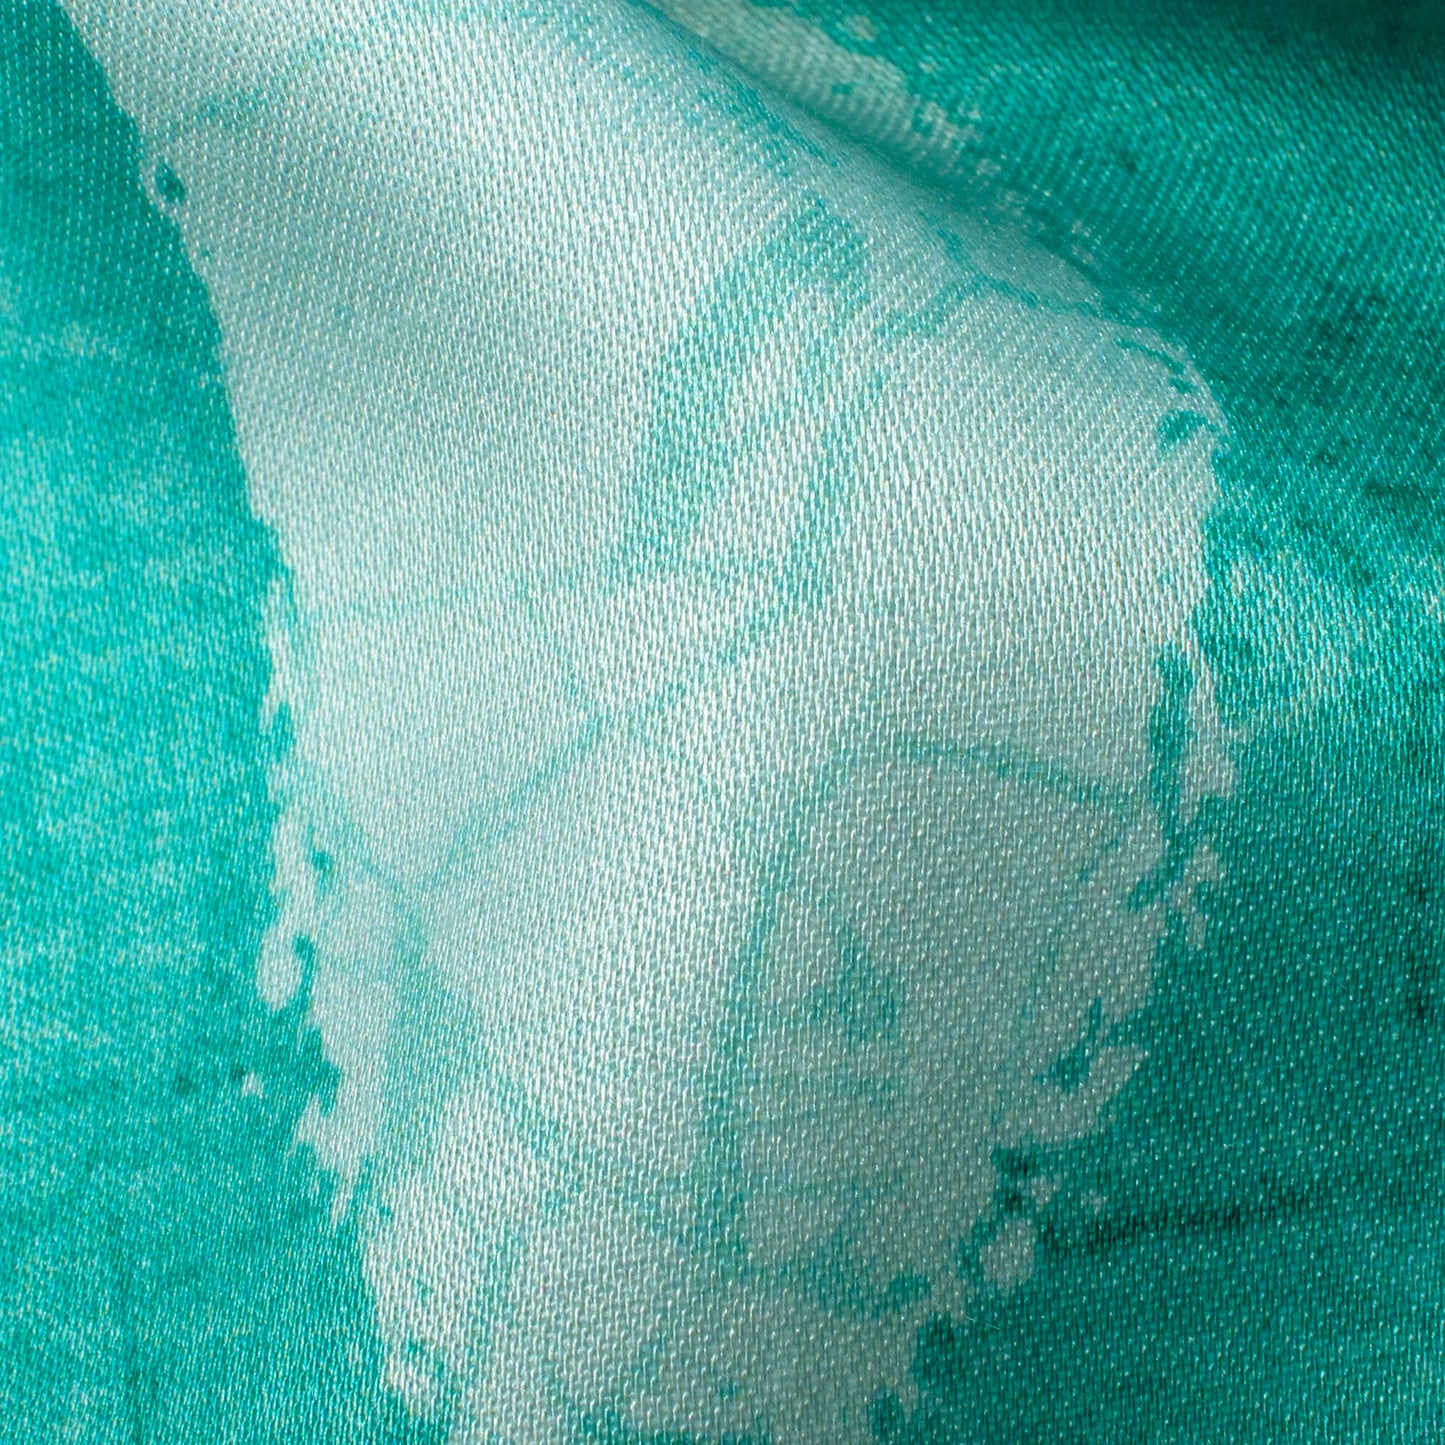 Turquoise And White Quirky Pattern Digital Print Premium Lush Satin Fabric